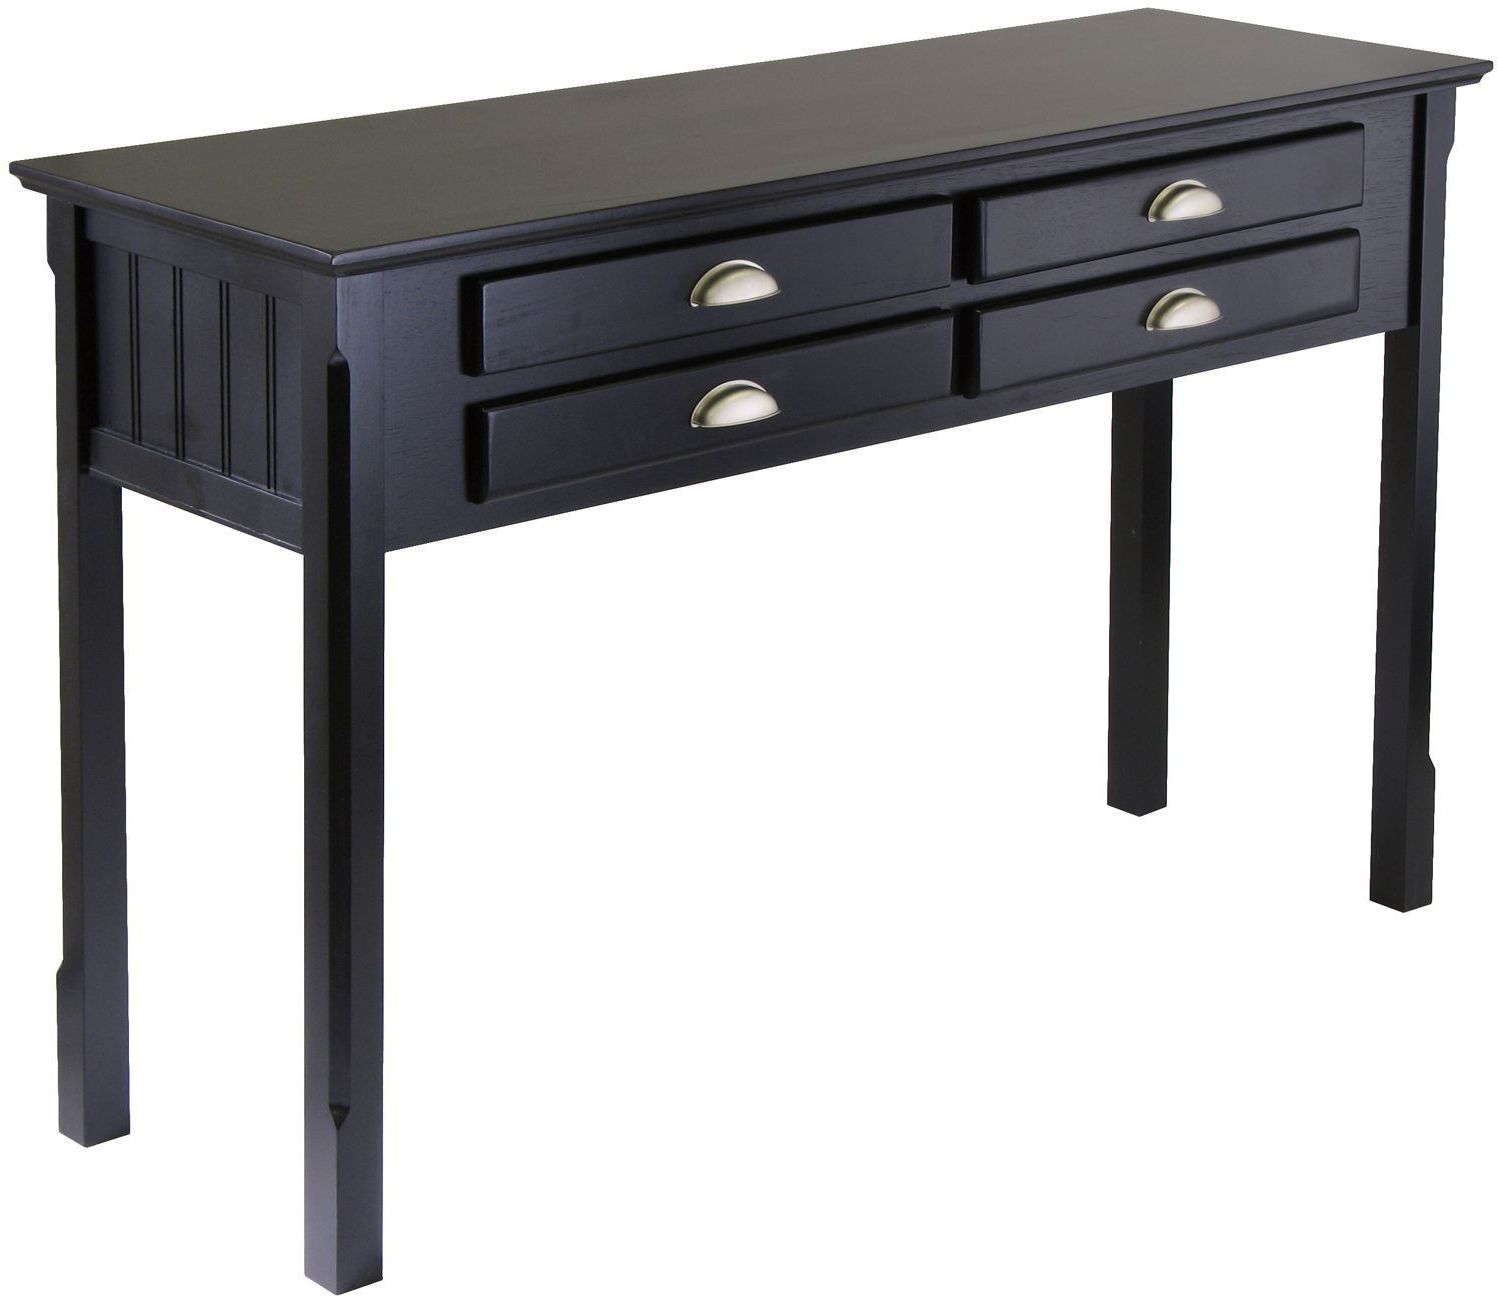 Aged Black Console Tables Pertaining To Fashionable Timber Black Hall/console Table From Winsomewood (View 4 of 10)